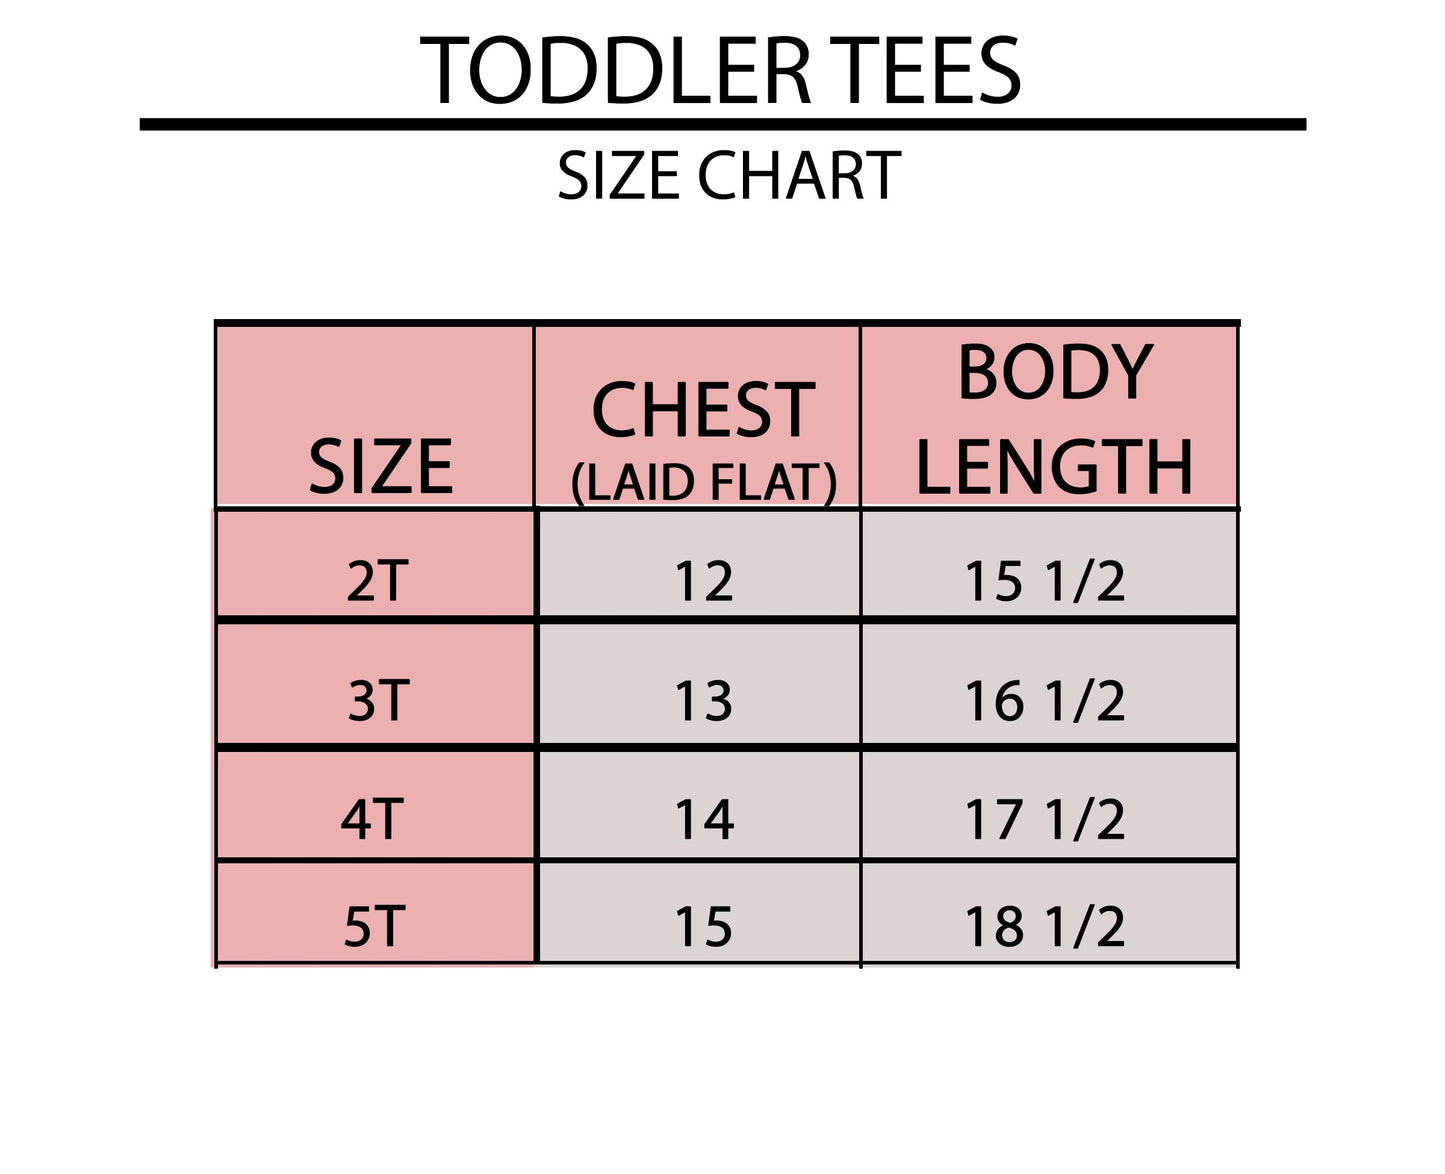 Checkered Spooky Vibes | Toddler Short Sleeve Crew Neck